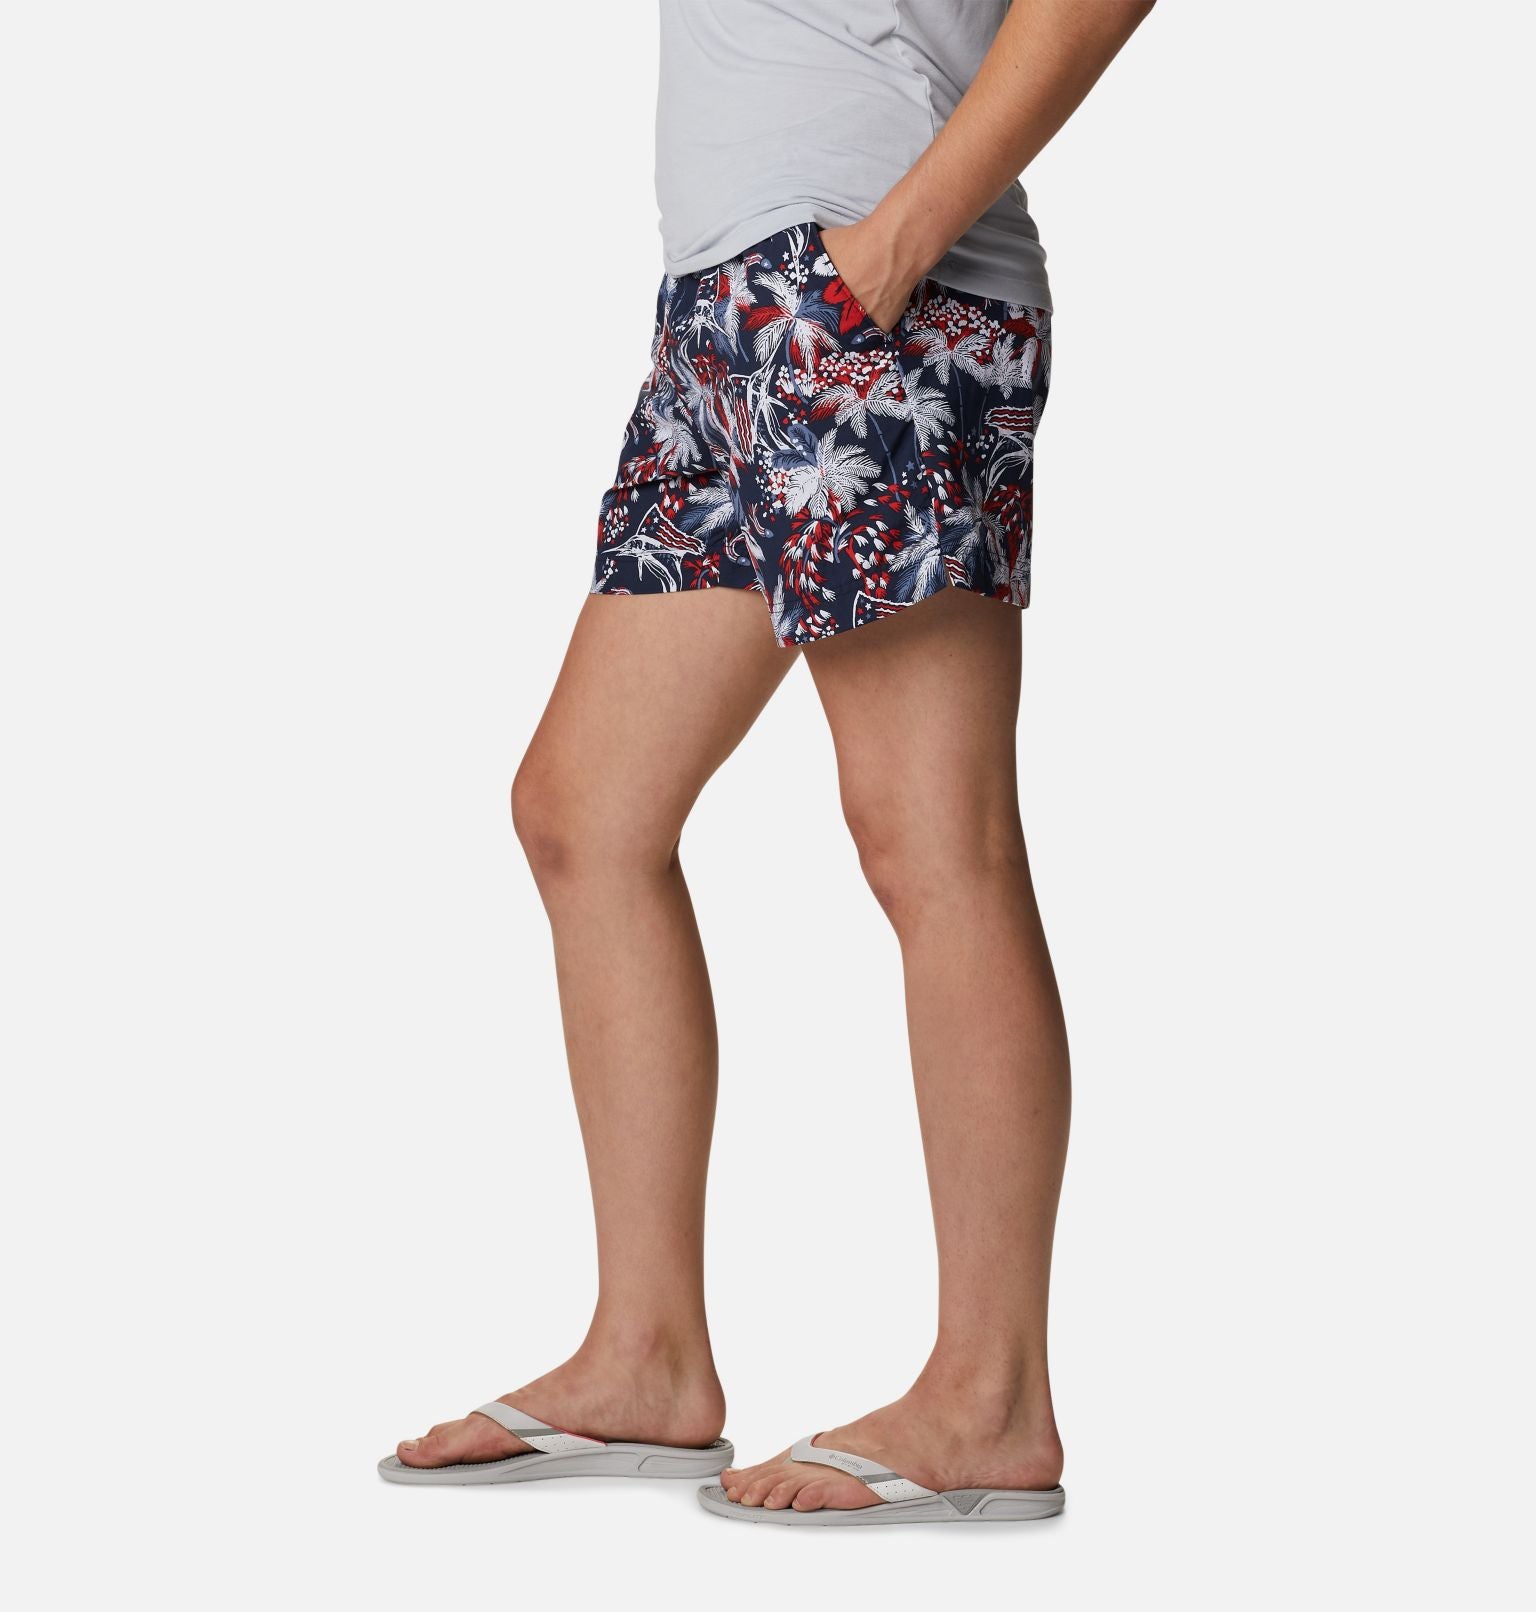 WOMEN'S 5-IN SUPER BACKCAST PRINTED SHORTS - 1881161-5